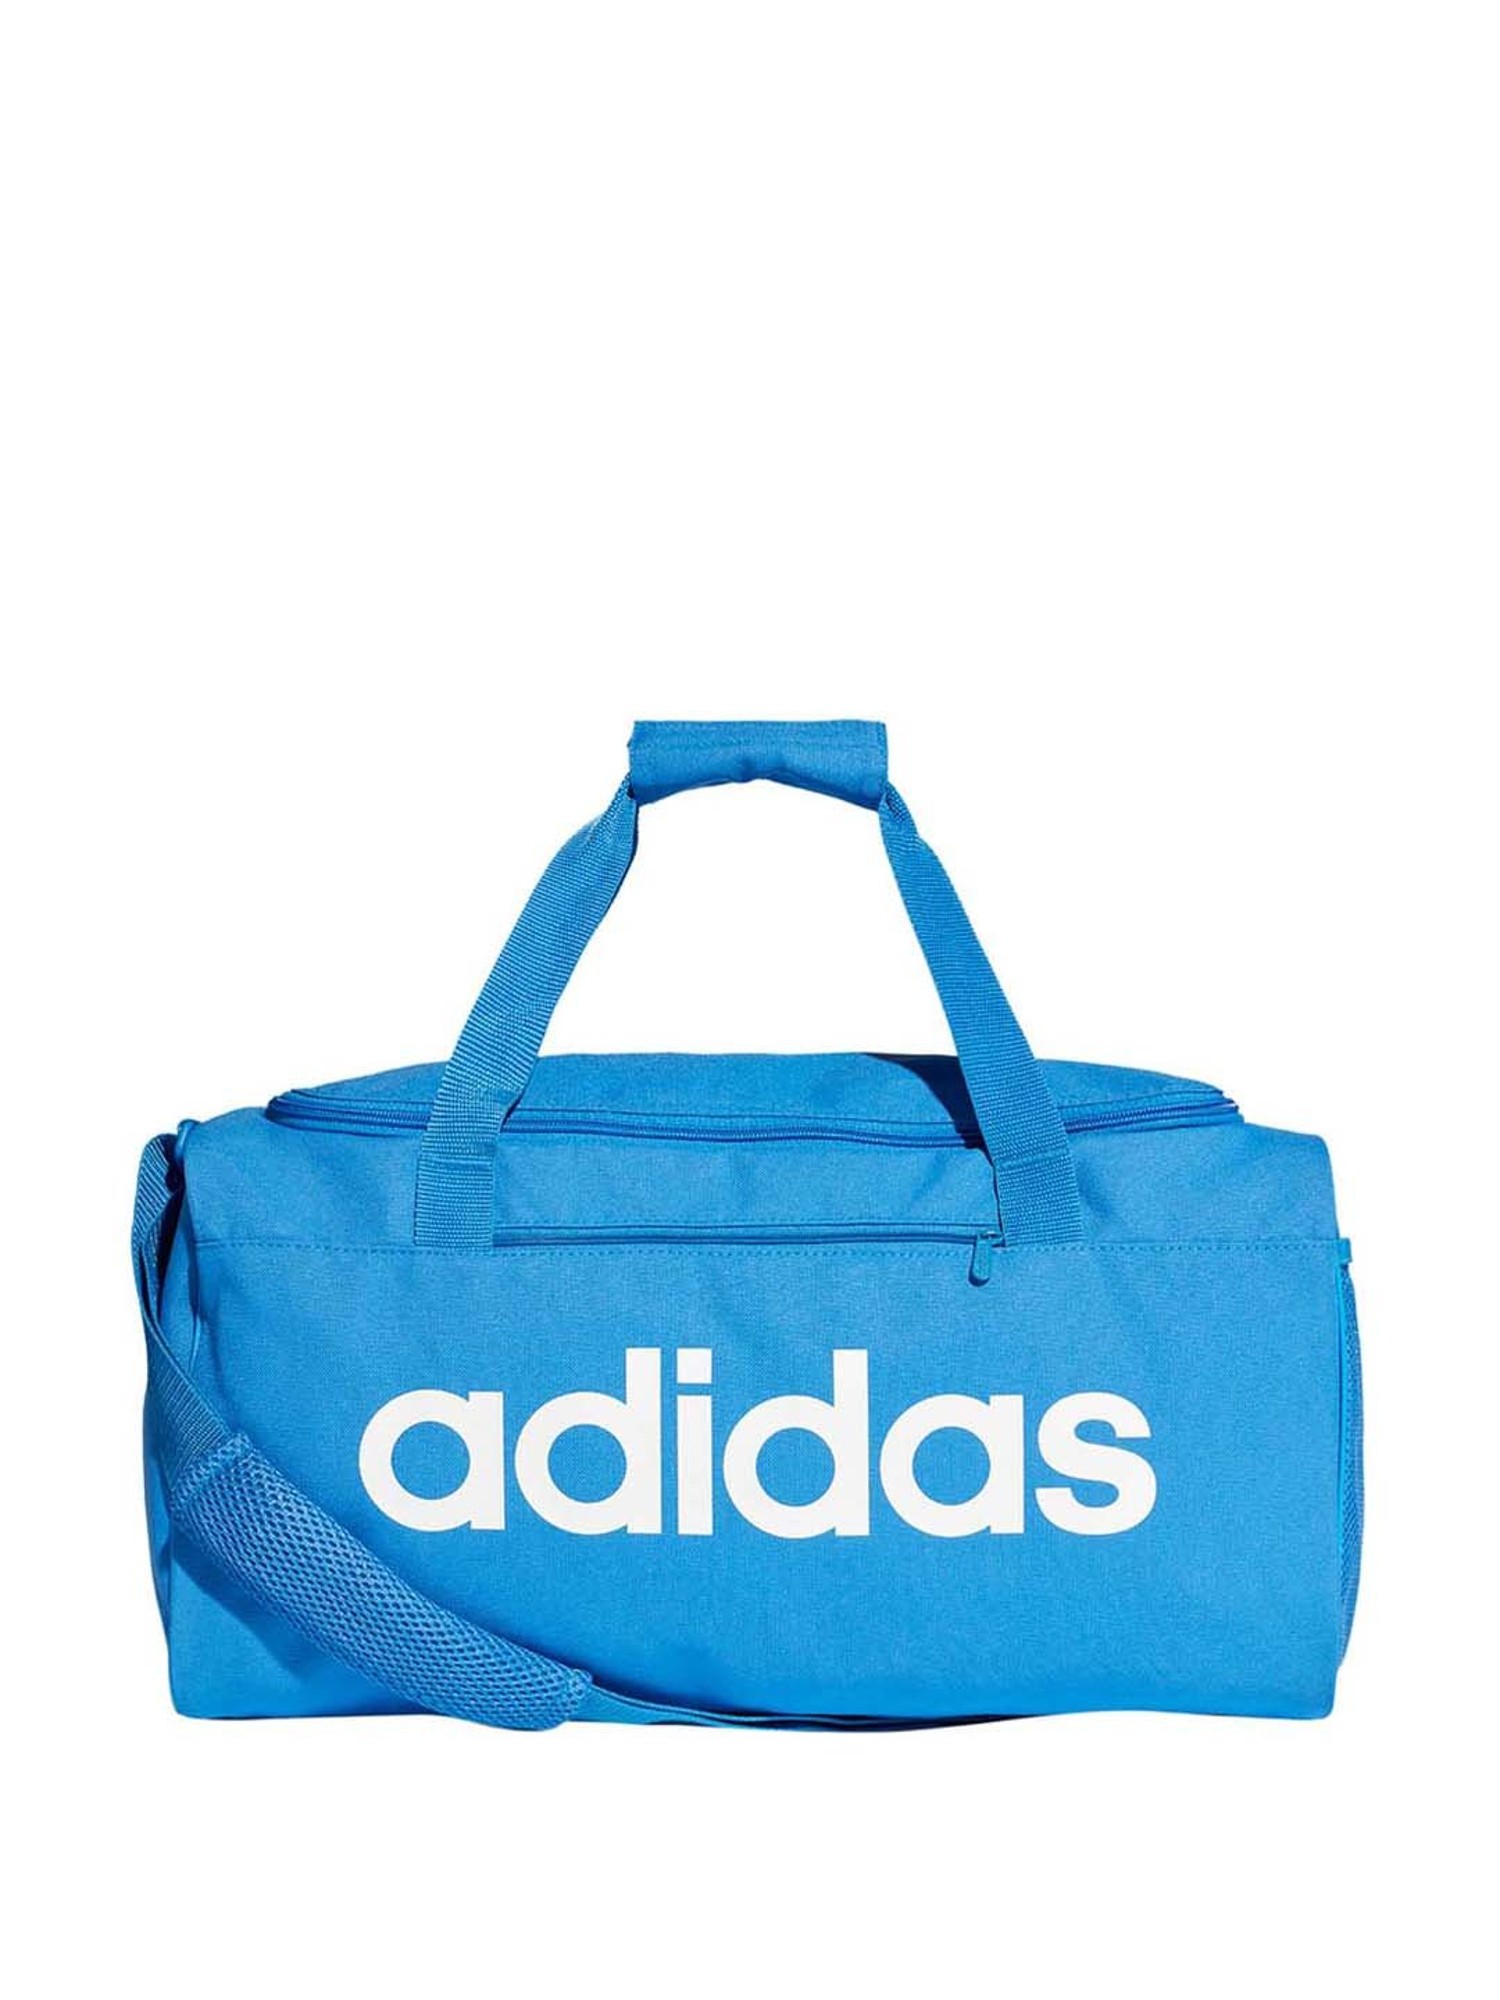 adidas UnisexAdult Sport Performance Gym Sack Black NS  Amazonin Bags  Wallets and Luggage